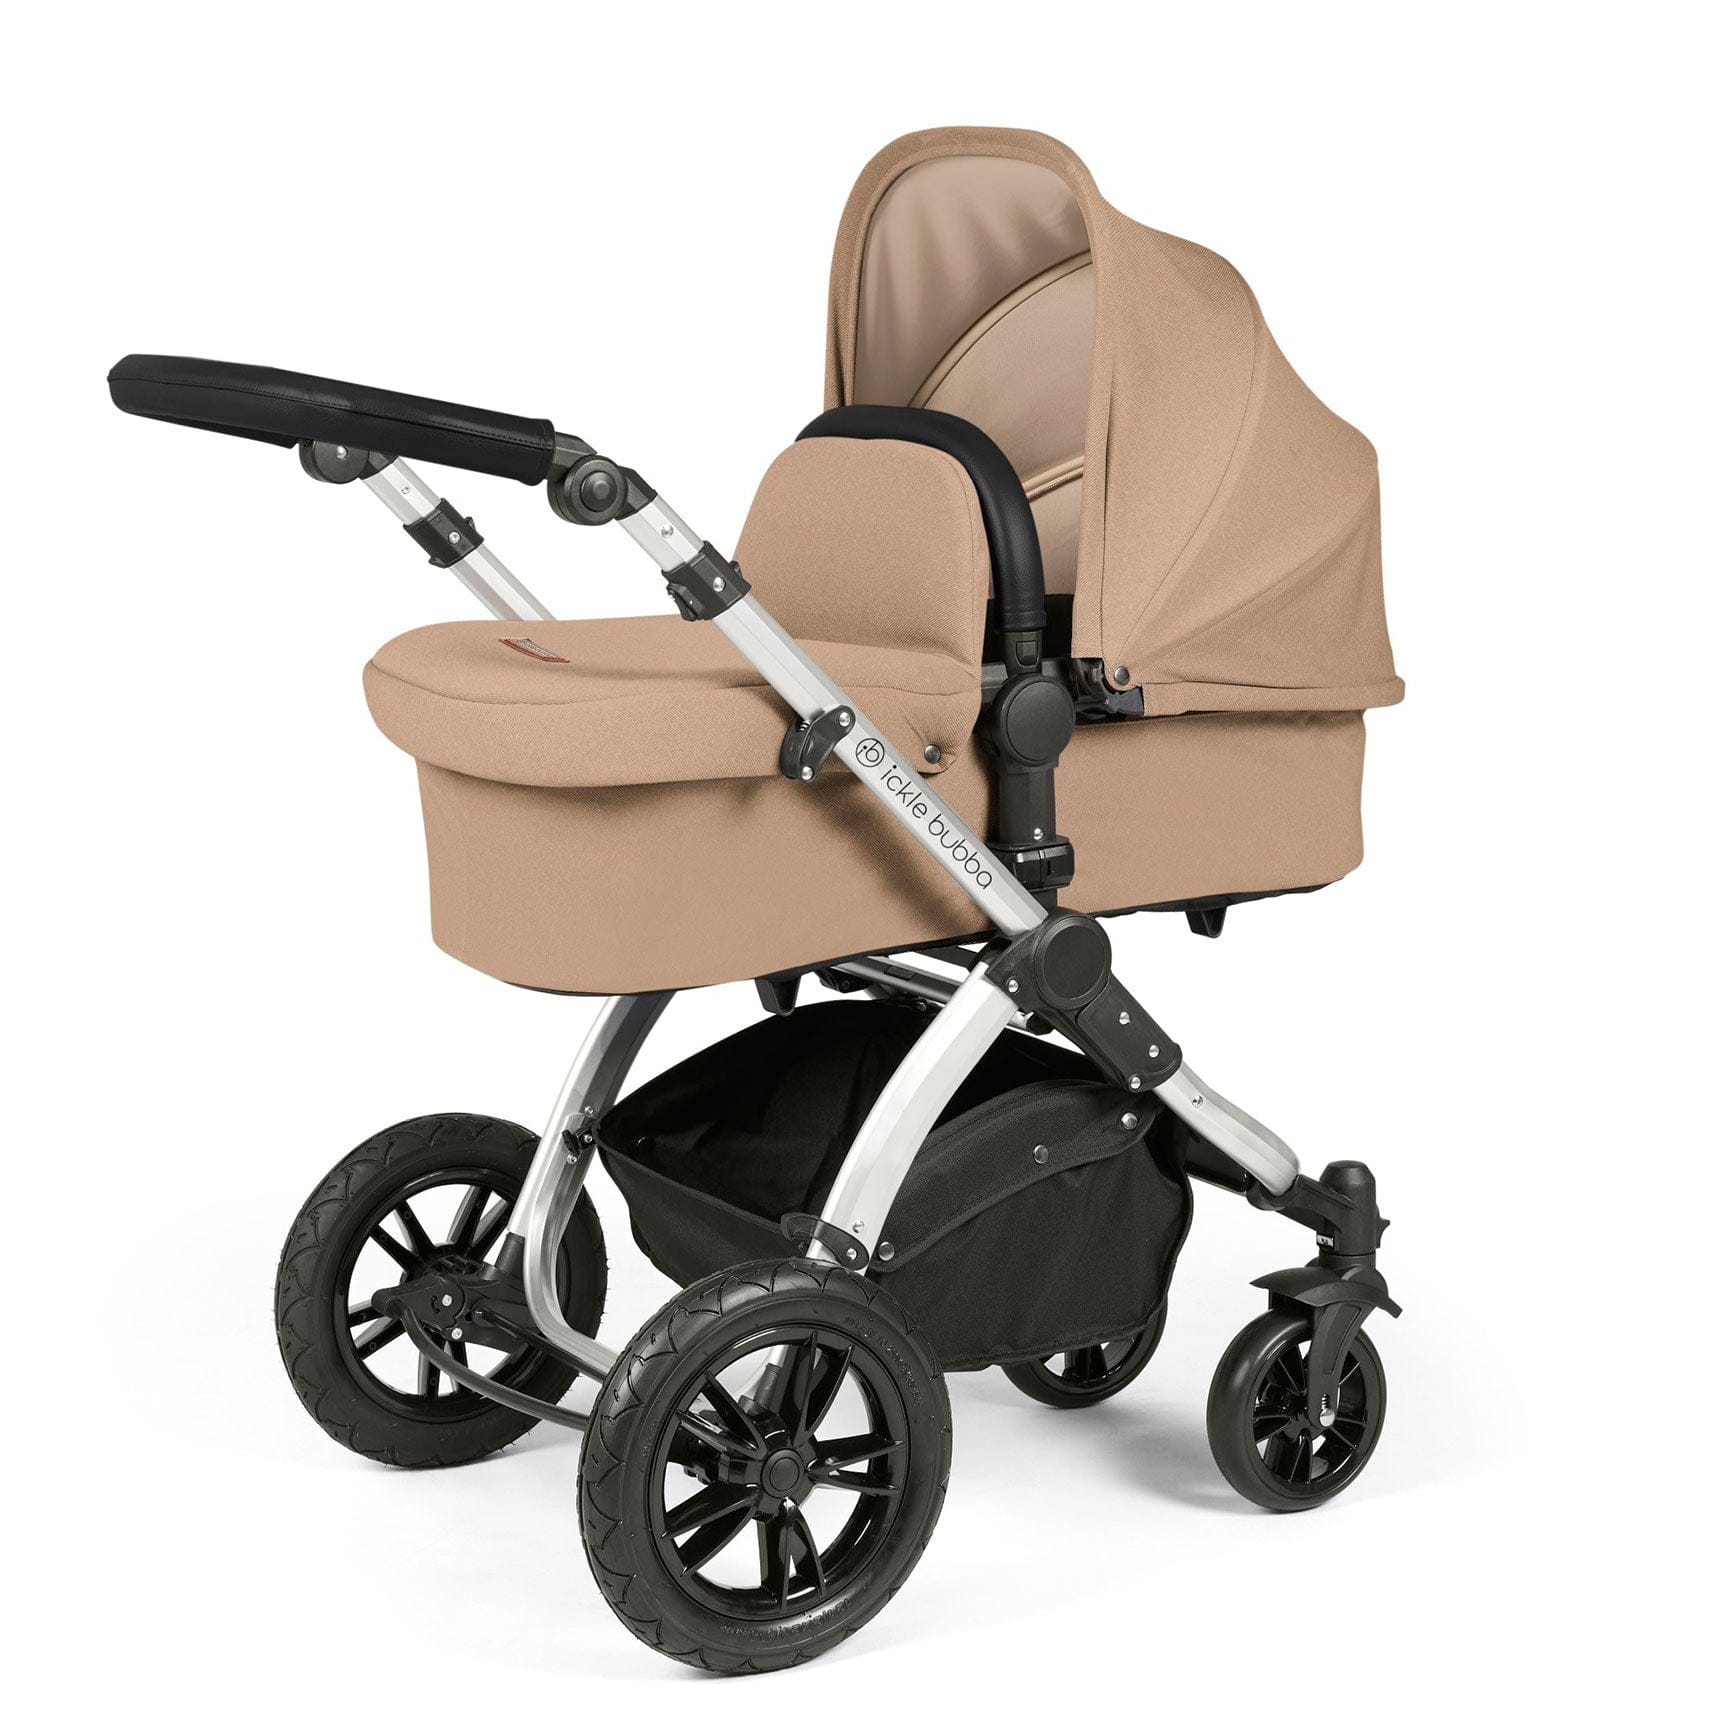 Ickle Bubba Stomp Luxe All-in-One Travel System with Isofix Base in Silver/Desert/Black Travel Systems 10-011-300-257 5056515026597